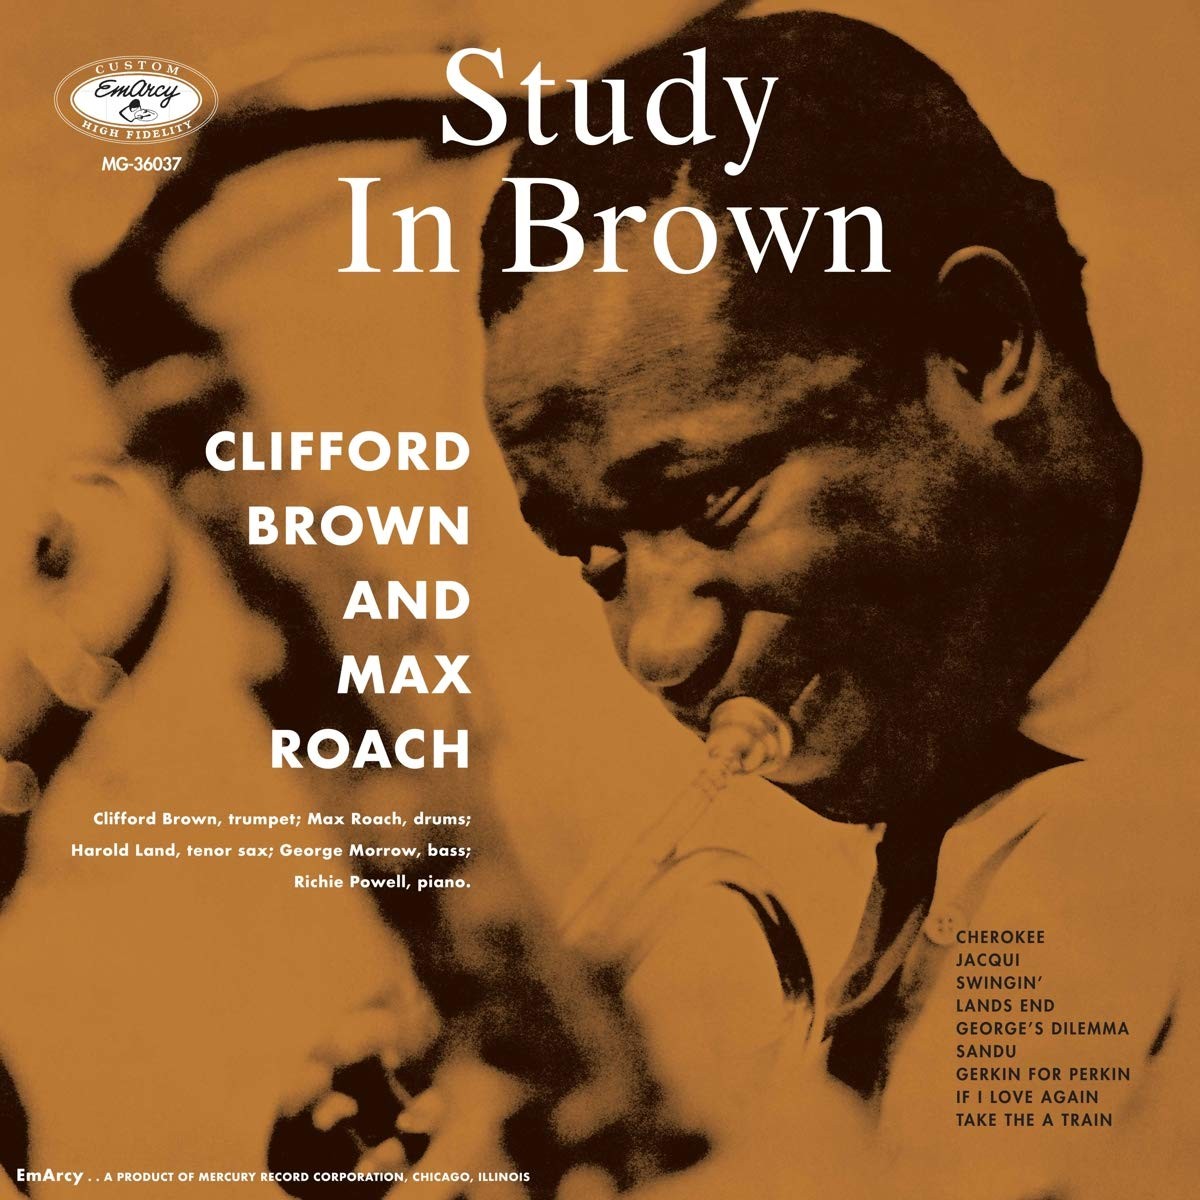 Clifford Brown & Max Roach - Study In Brown Acoustic Sounds (Vinyl LP)